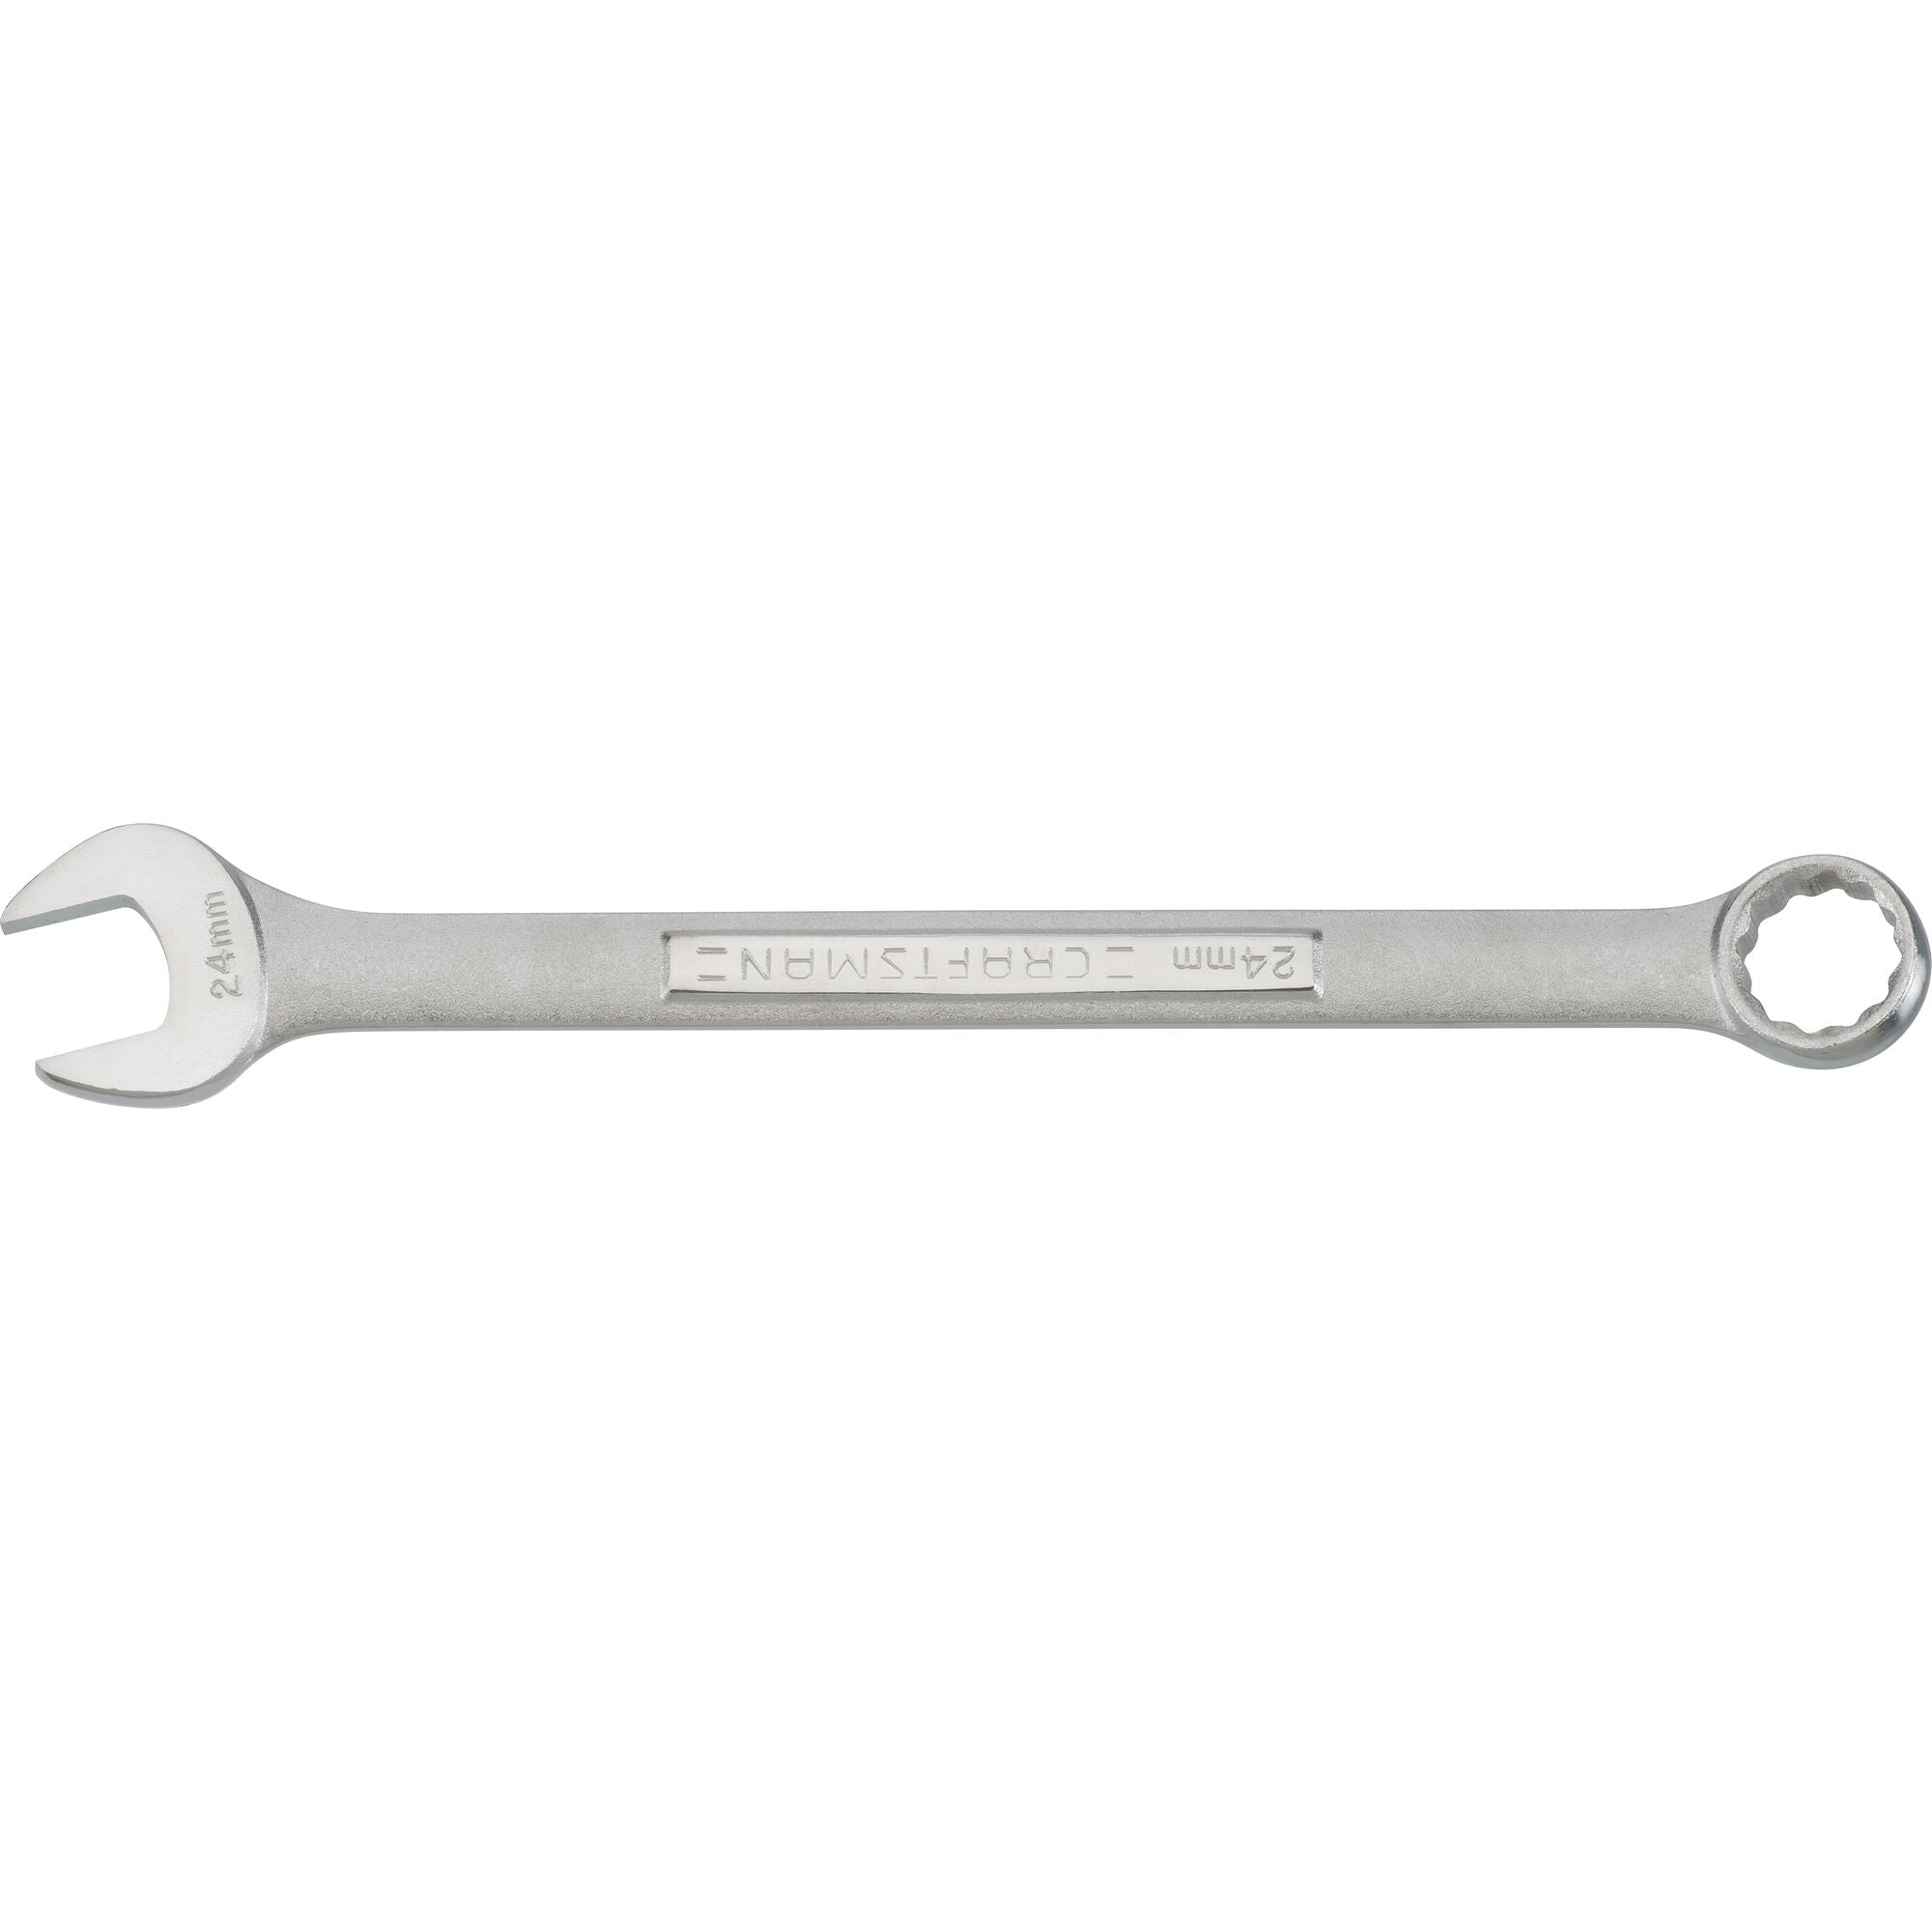 Standard Metric Combination Wrench (24mm) | CRAFTSMAN